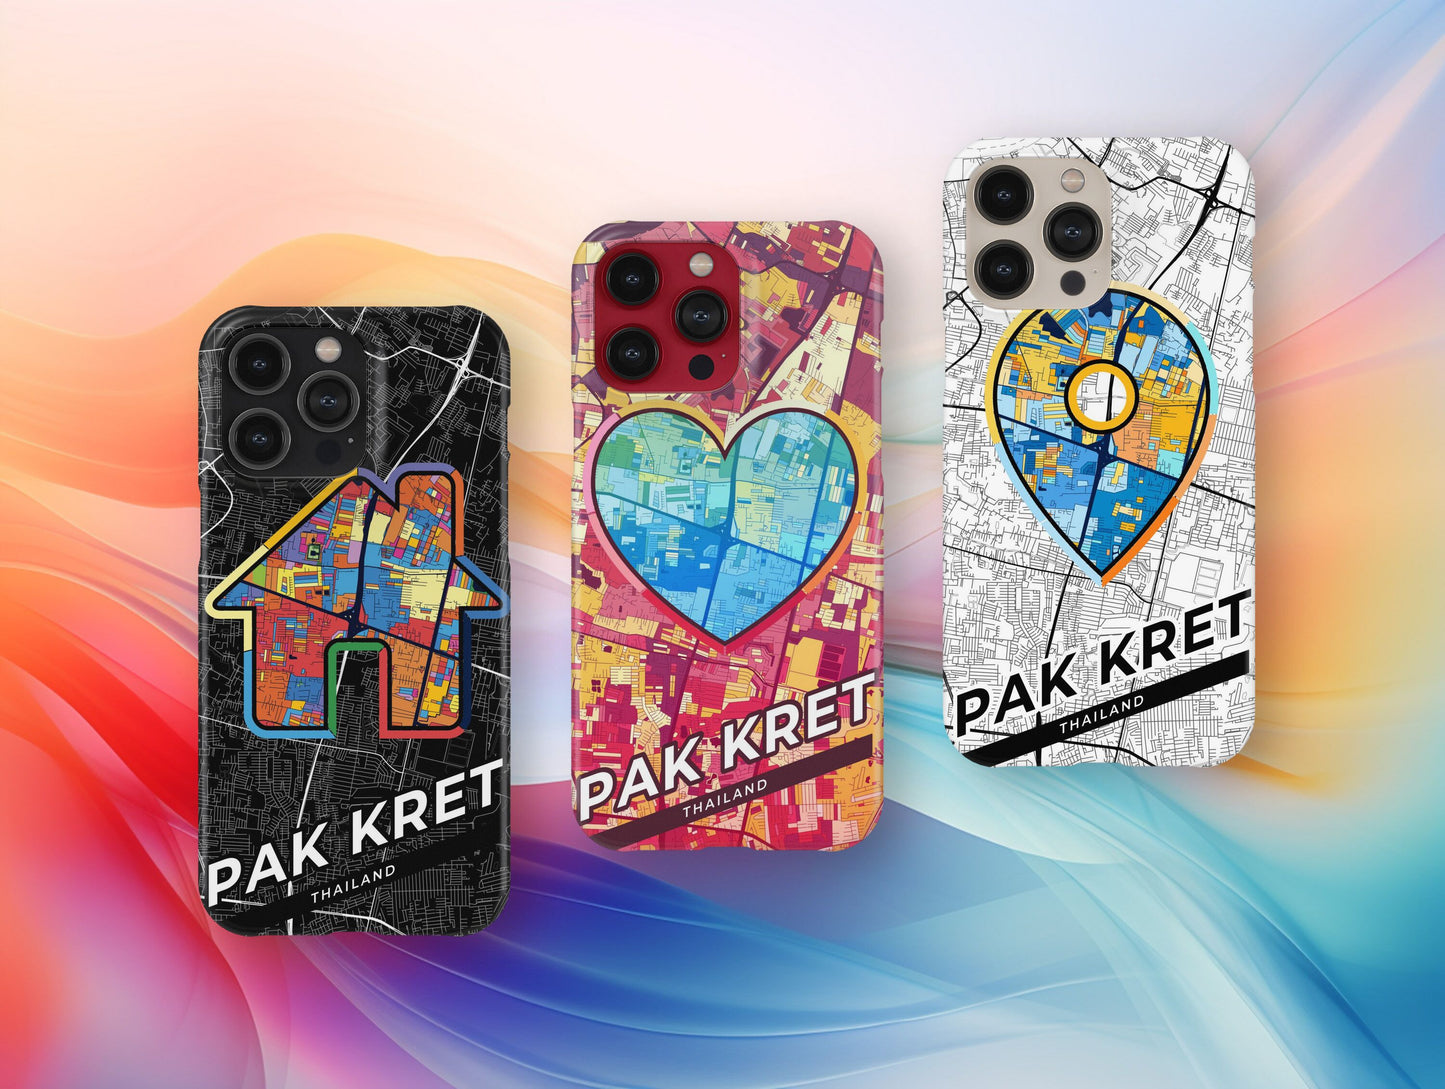 Pak Kret Thailand slim phone case with colorful icon